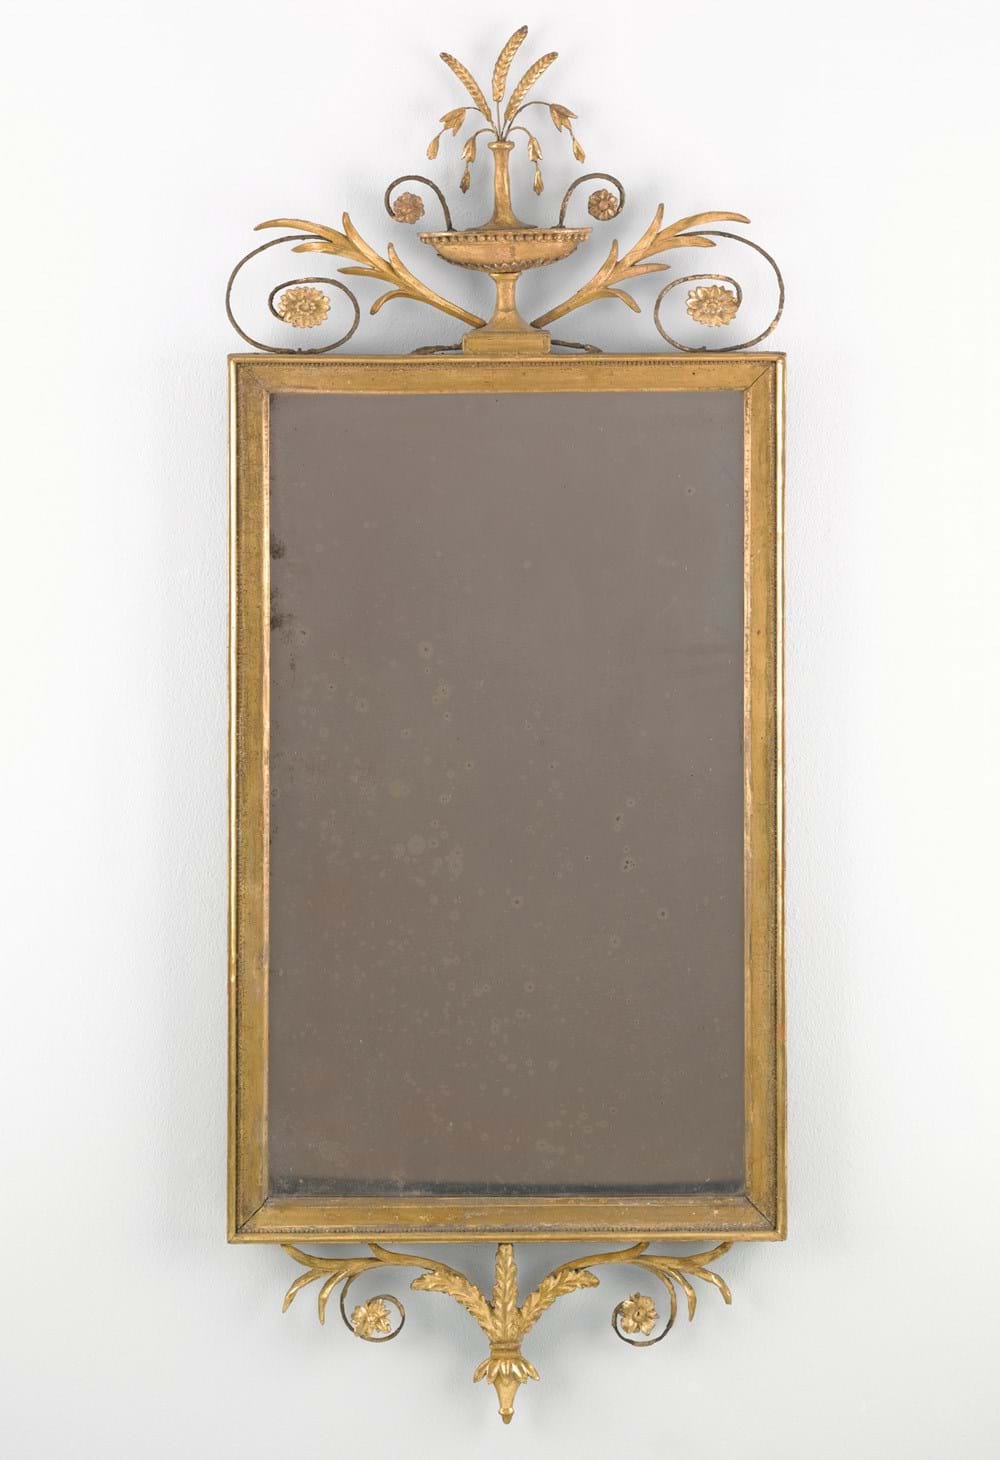 Large mirror in gold frame